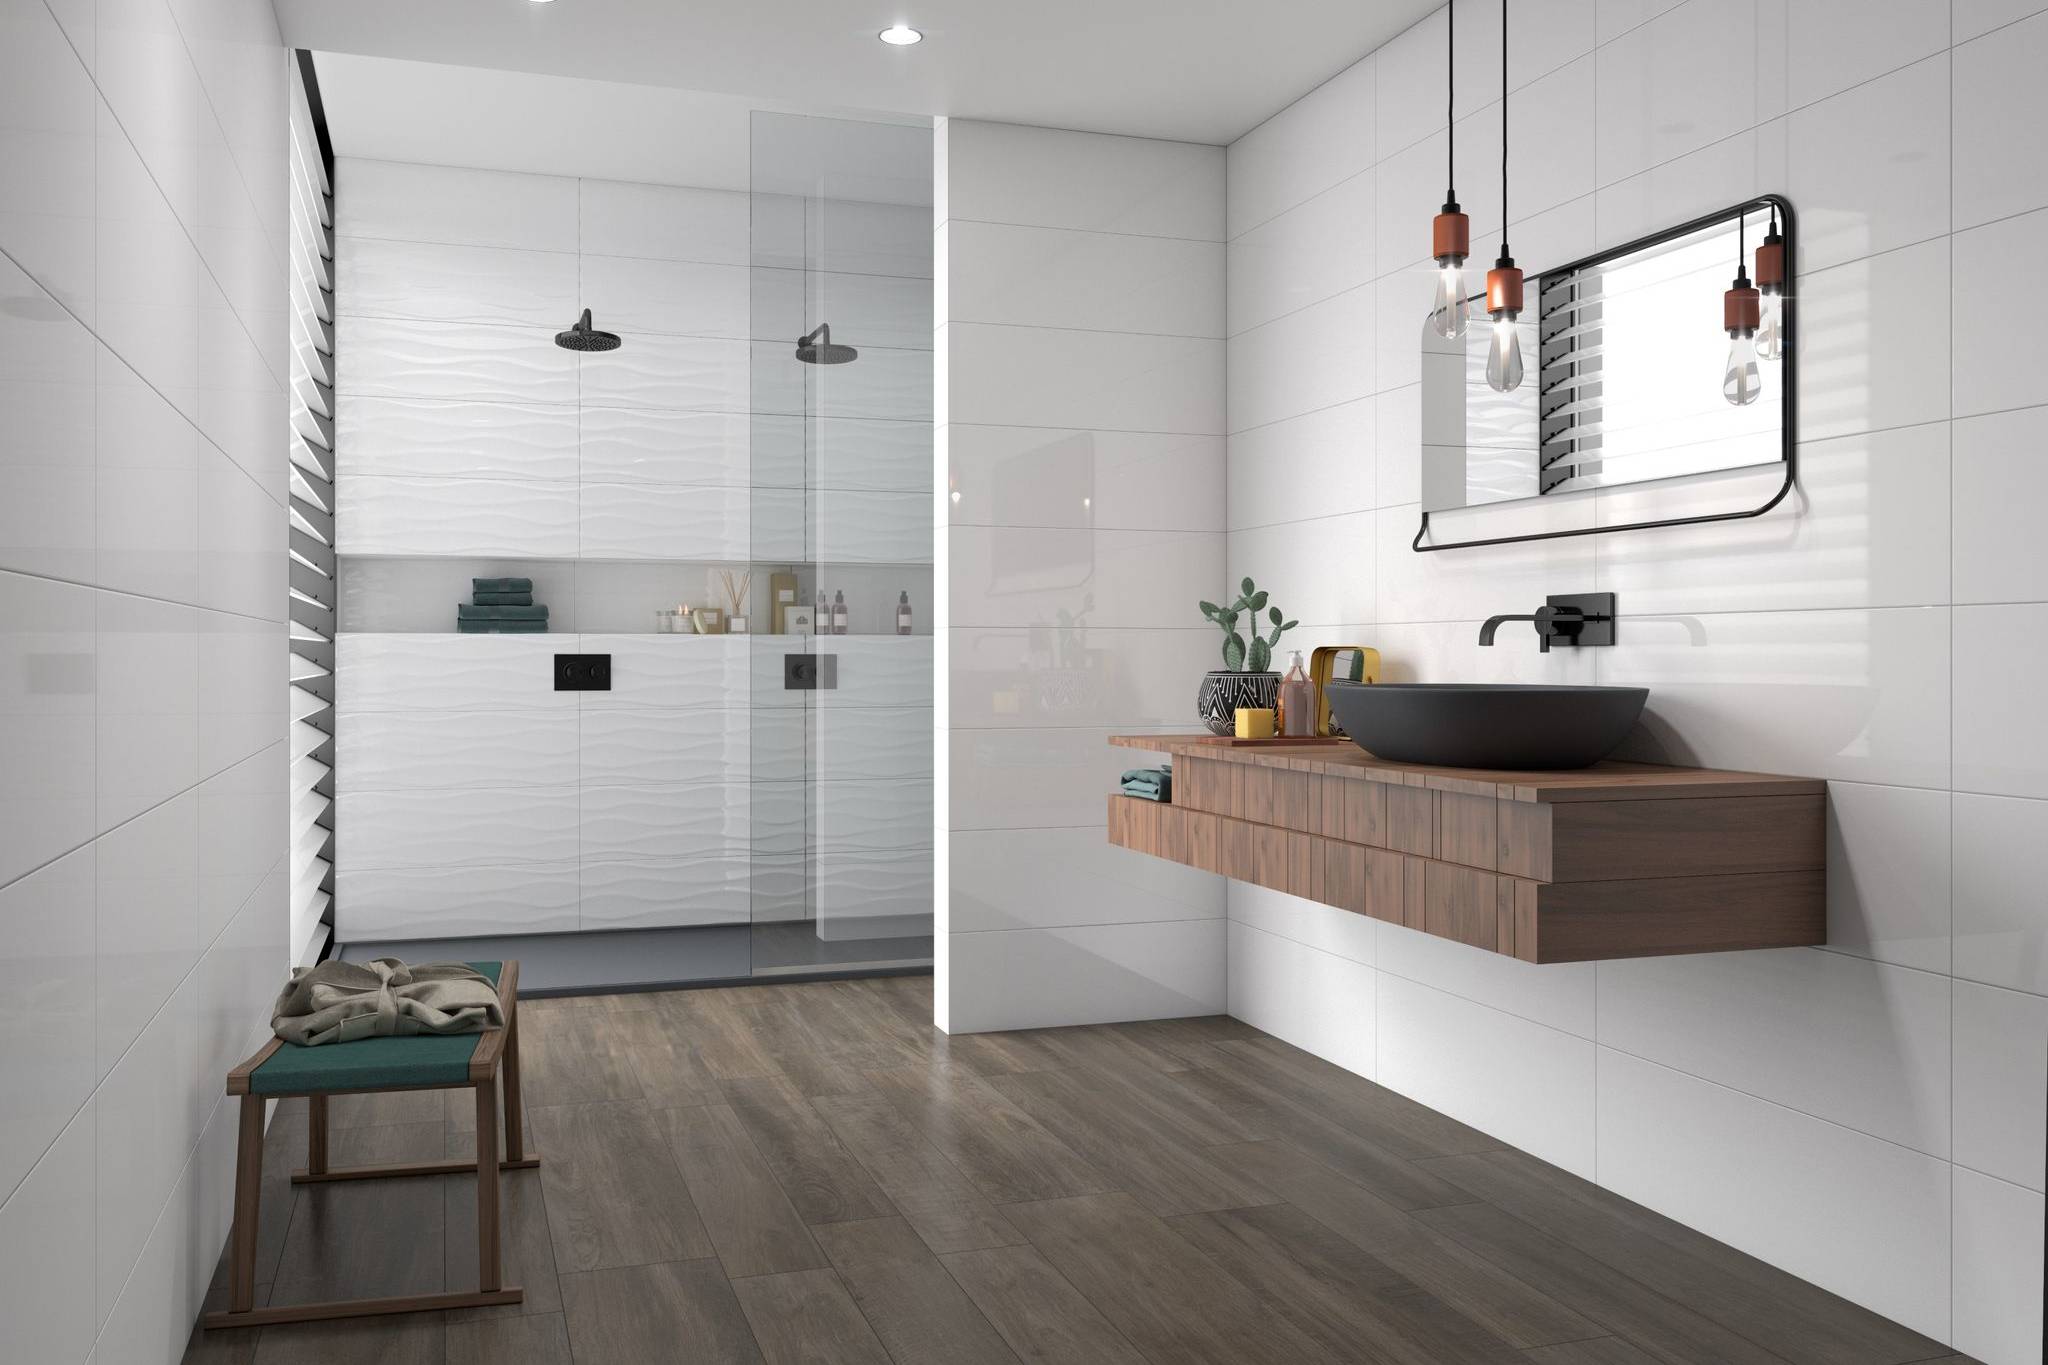 Venezia Blanco Vibe 10x30  and 10x30 | Qualis Ceramica | Luxury Tile and Vinyl at affordable prices